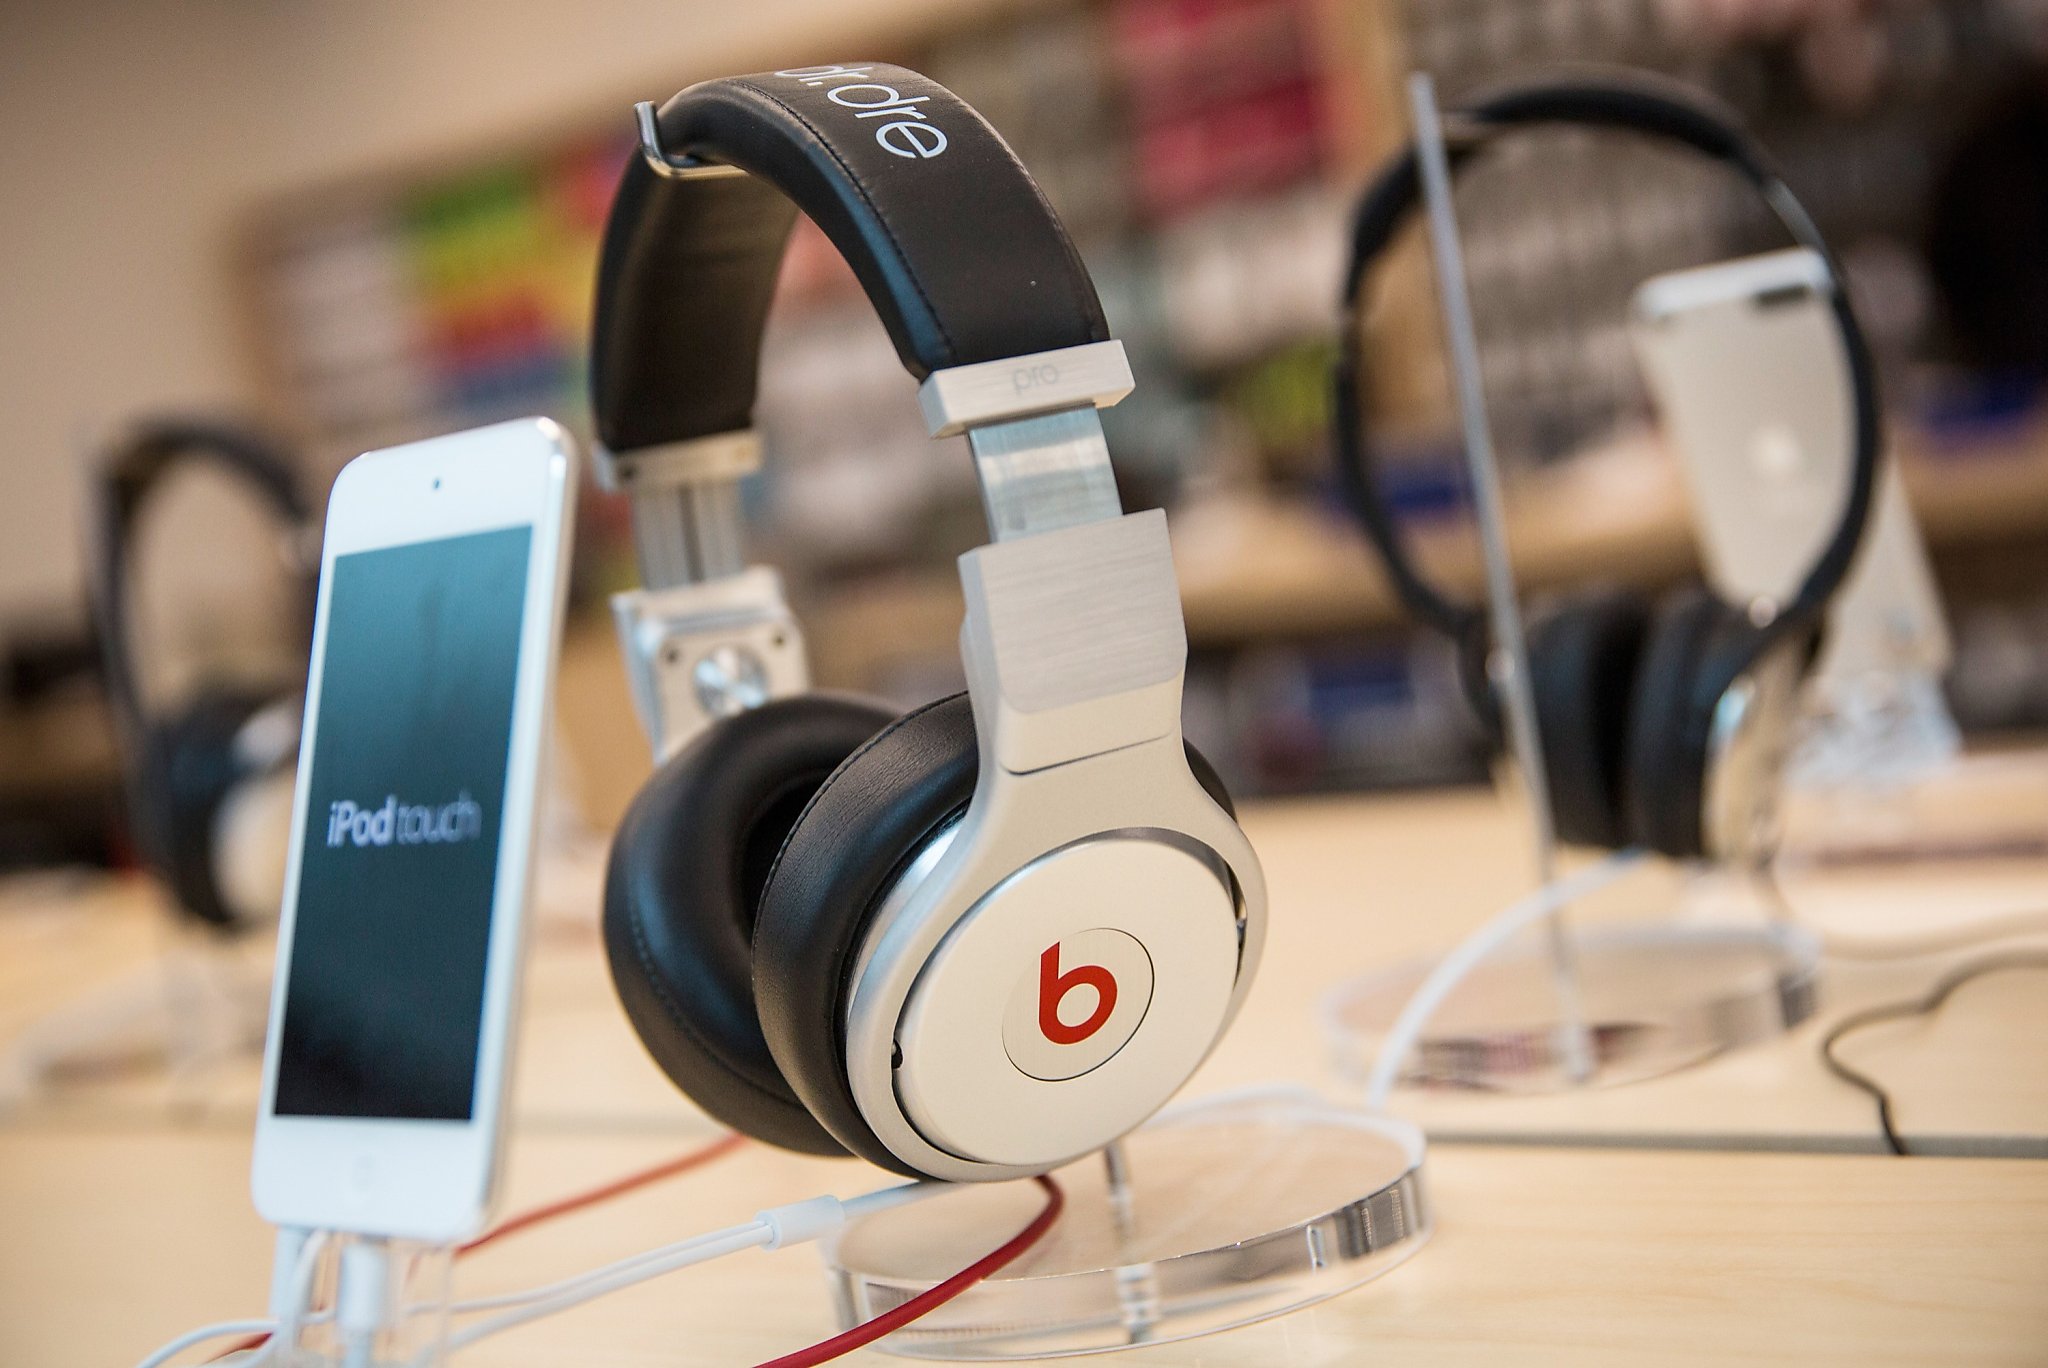 Loser an Apple deal for Beats? Big-box stores